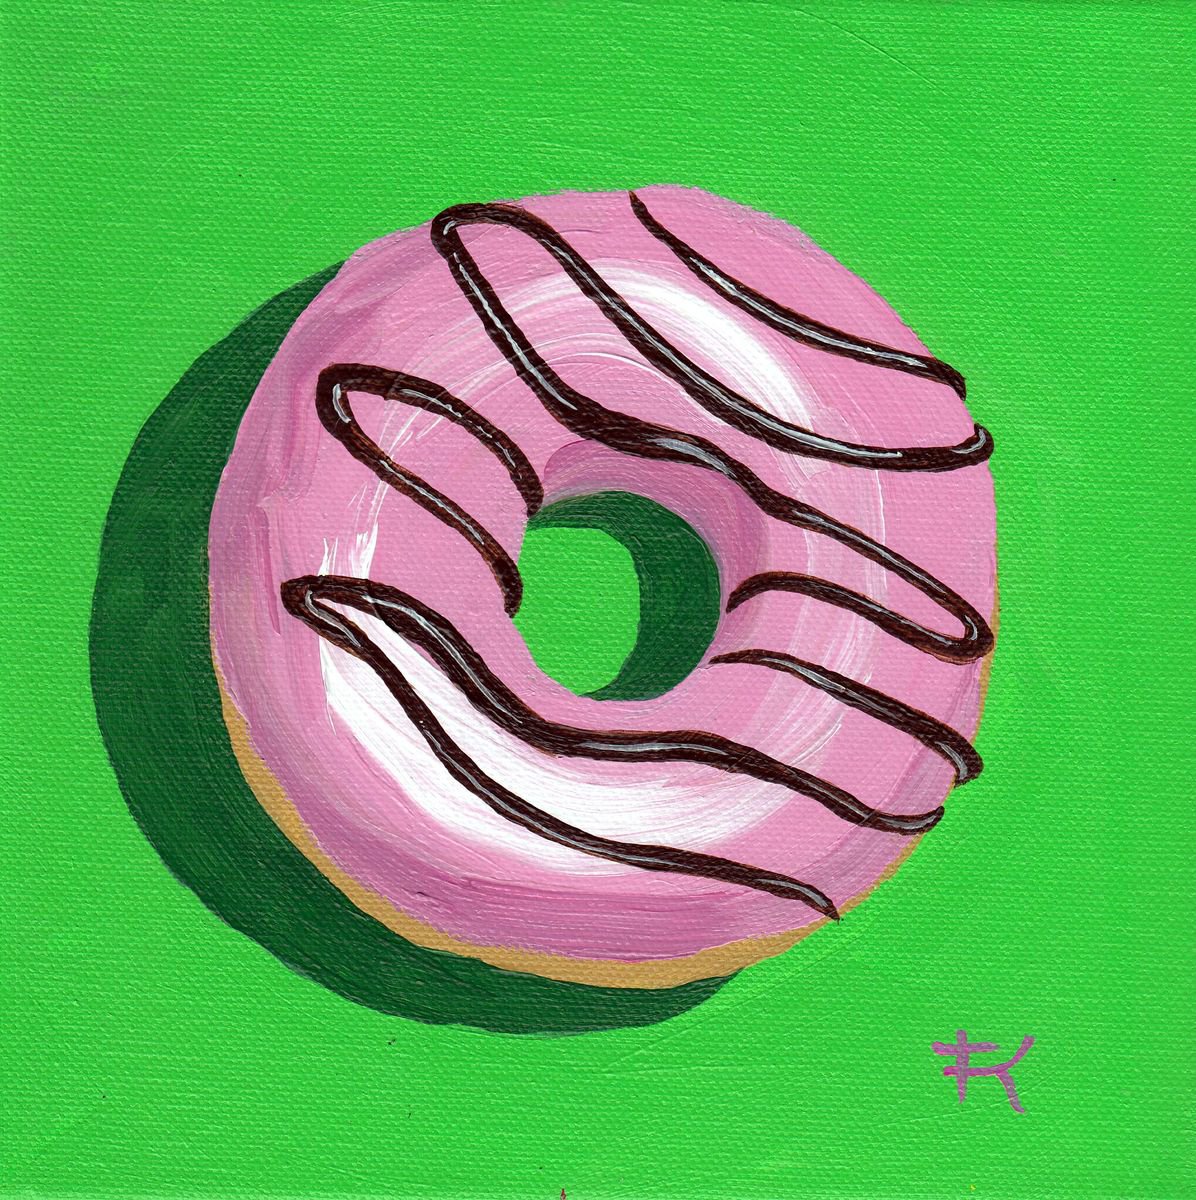 Pink doughnut with chocolate drizzle by Terri Kelleher